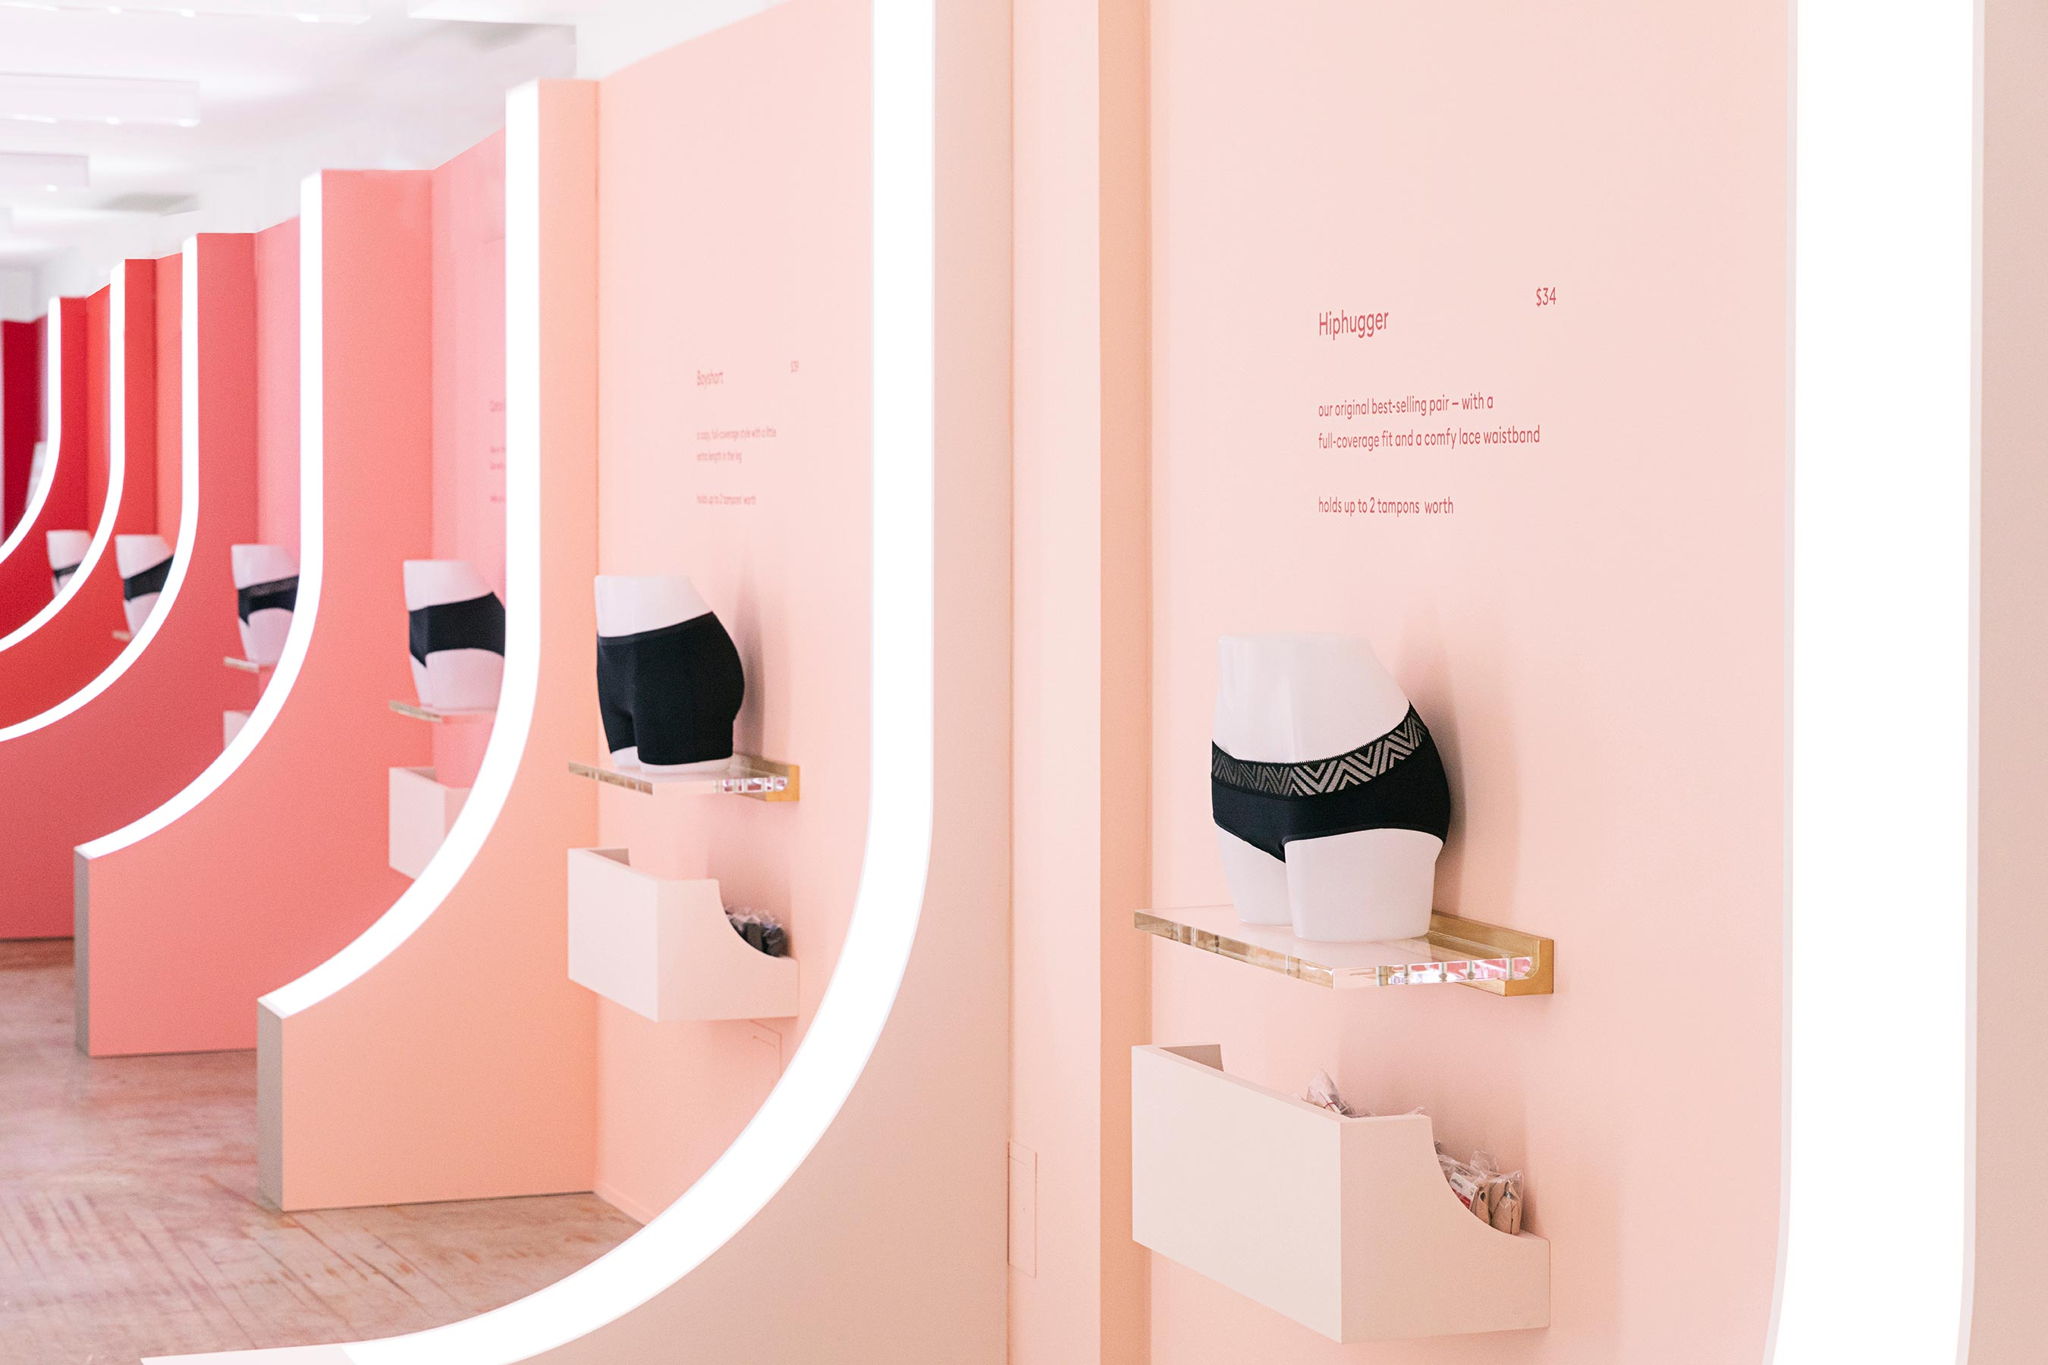 Thinx and Placeholder Introduce Their Pop-Up Shop 'The Rest Room' | Dieline  - Design, Branding u0026 Packaging Inspiration